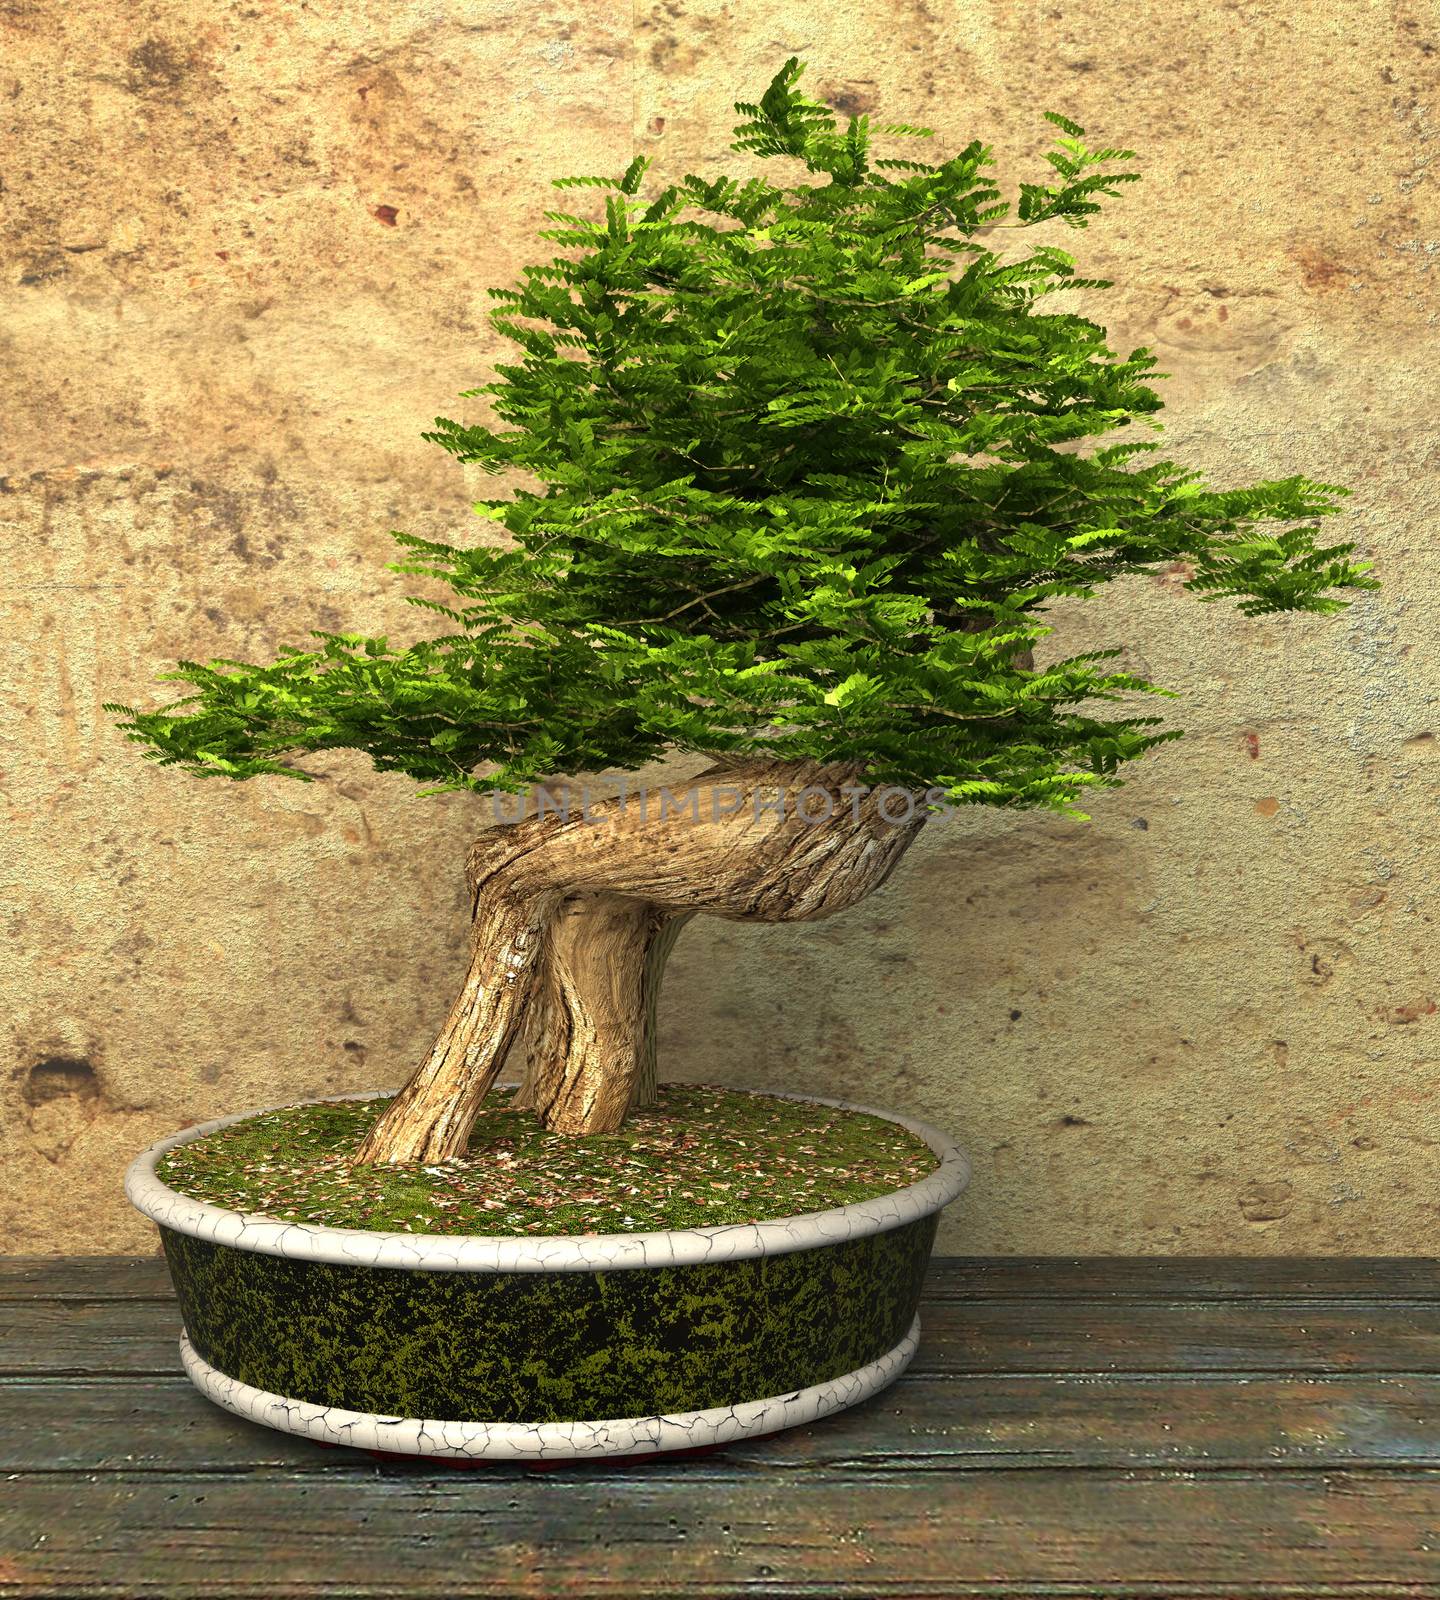 Decorative bonsai tree standing on a wooden table